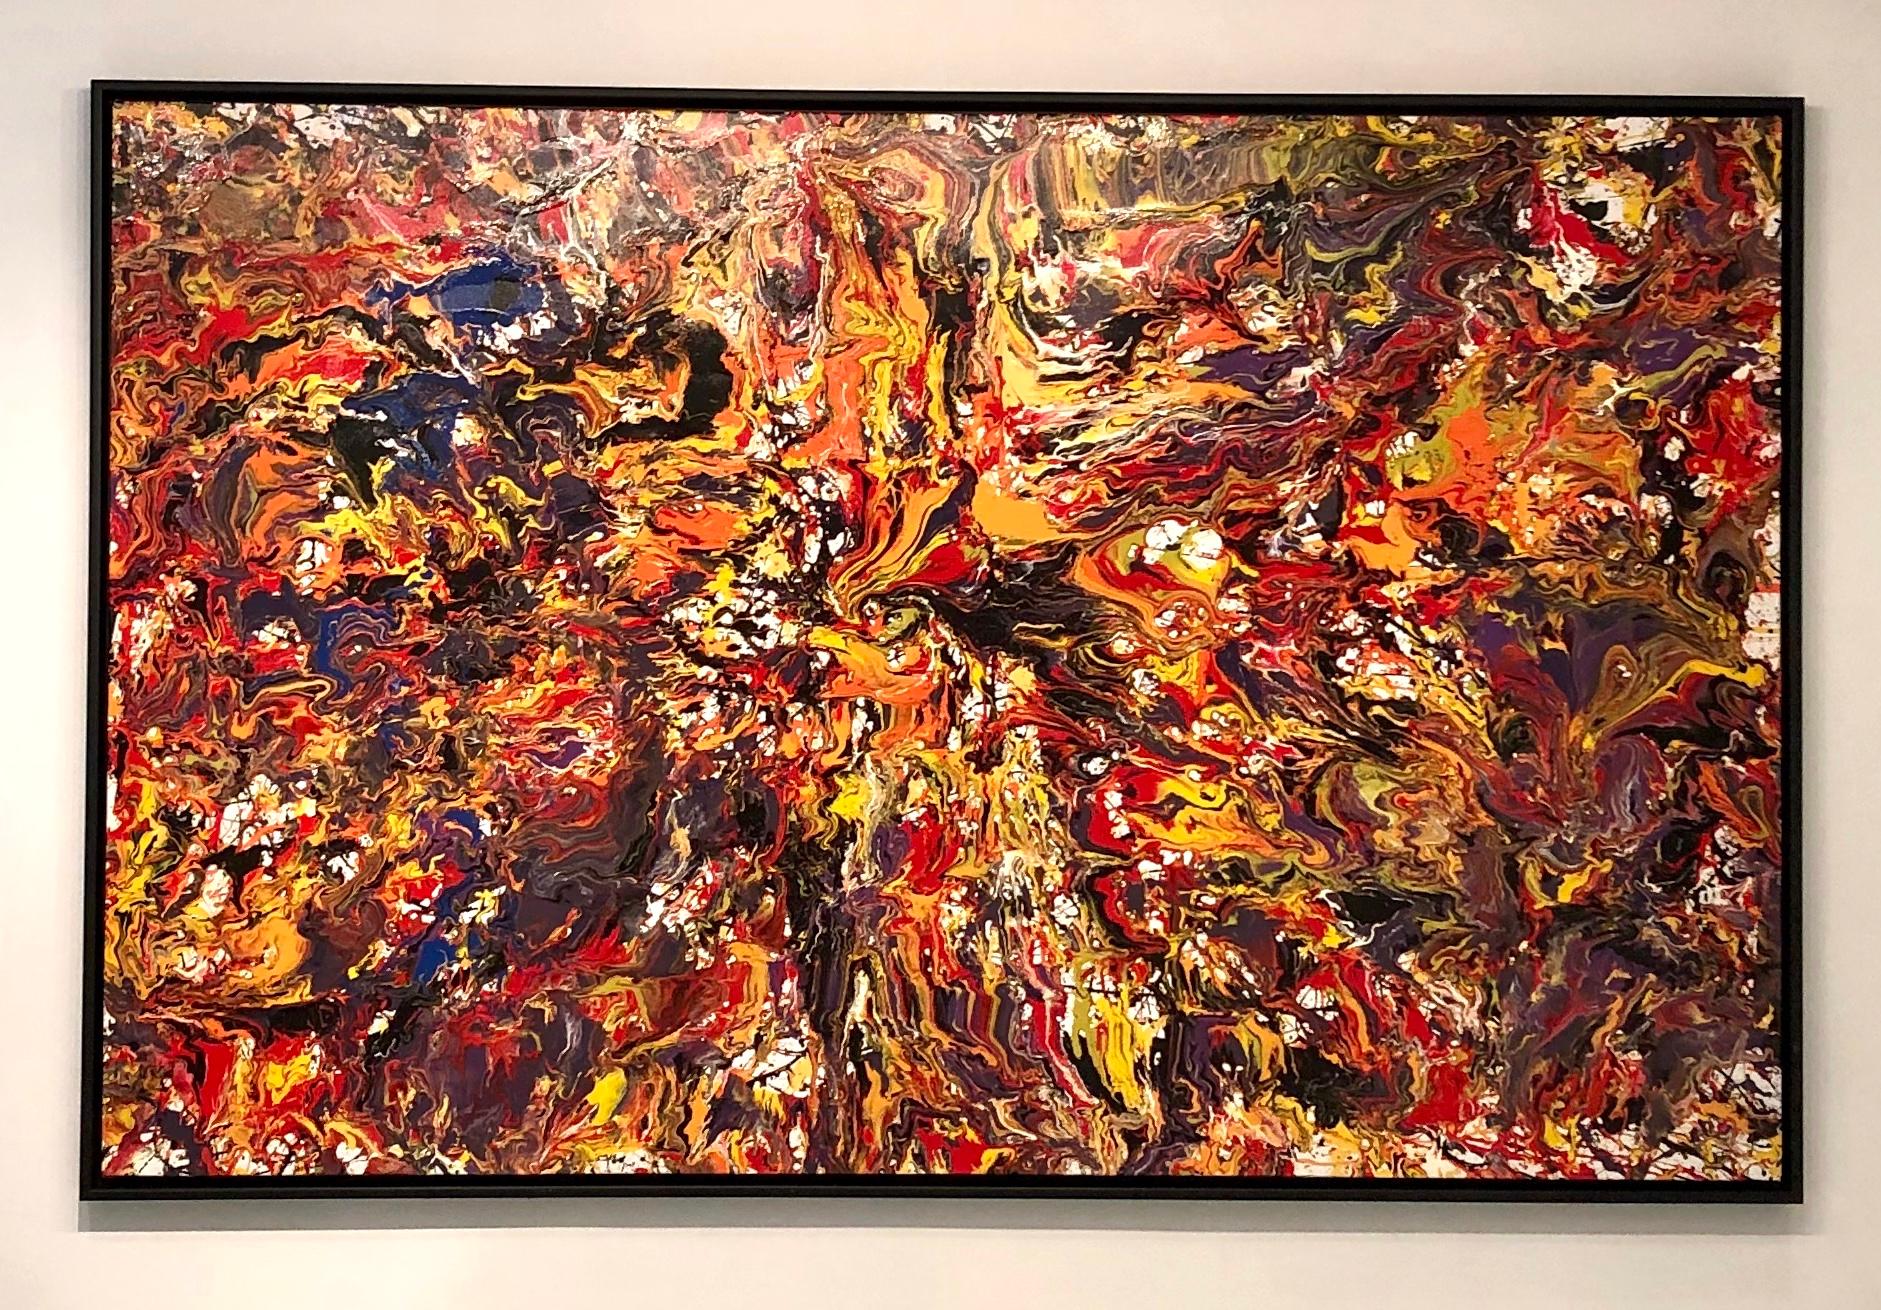 Steve Cohen Abstract Painting - Origin 1:  Inception  (Fire and Creation Captured)  (Floats in Black Frame)  